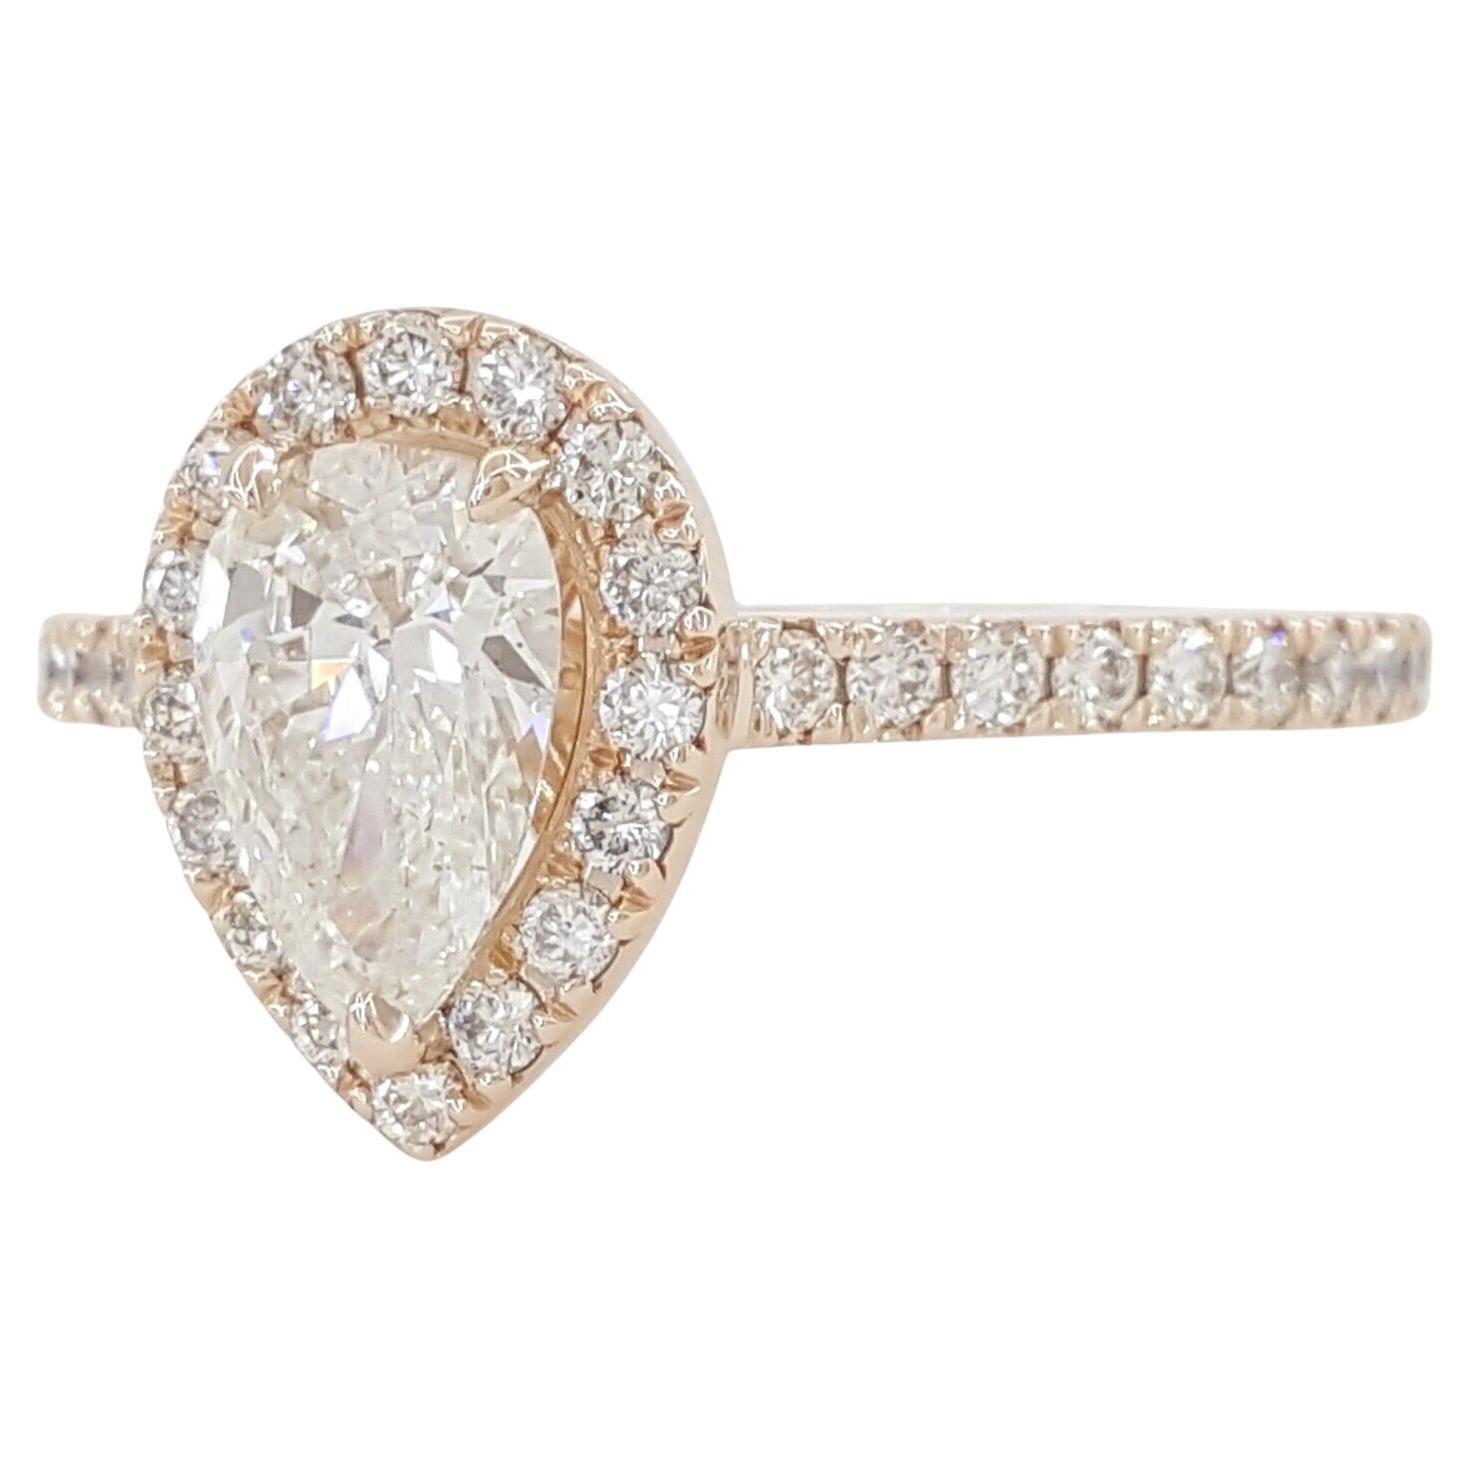 engagement ring with some specific details. Here's a breakdown of the components:

Center Stone:

Natural Pear Brilliant Cut Diamond
Weight: 0.70 carats
Color: H-I
Clarity: SI3
Halo Stones:

40 Natural Round Brilliant Cut Diamonds
Total Weight: 0.38